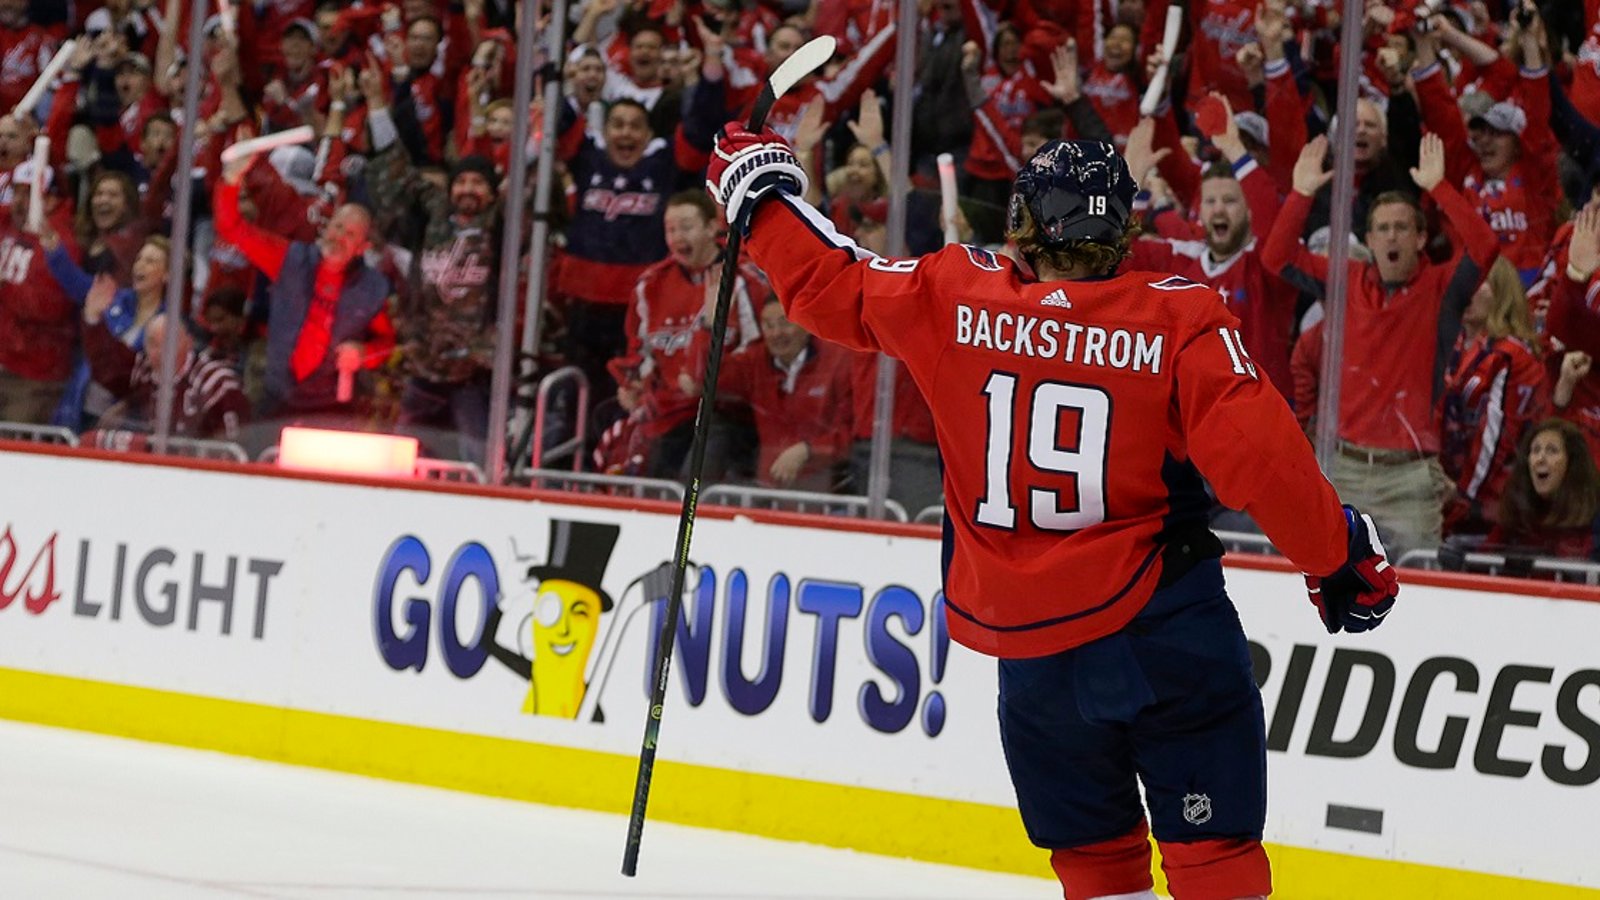 Bad news for Backstrom and the Capitals ahead of Game 3.